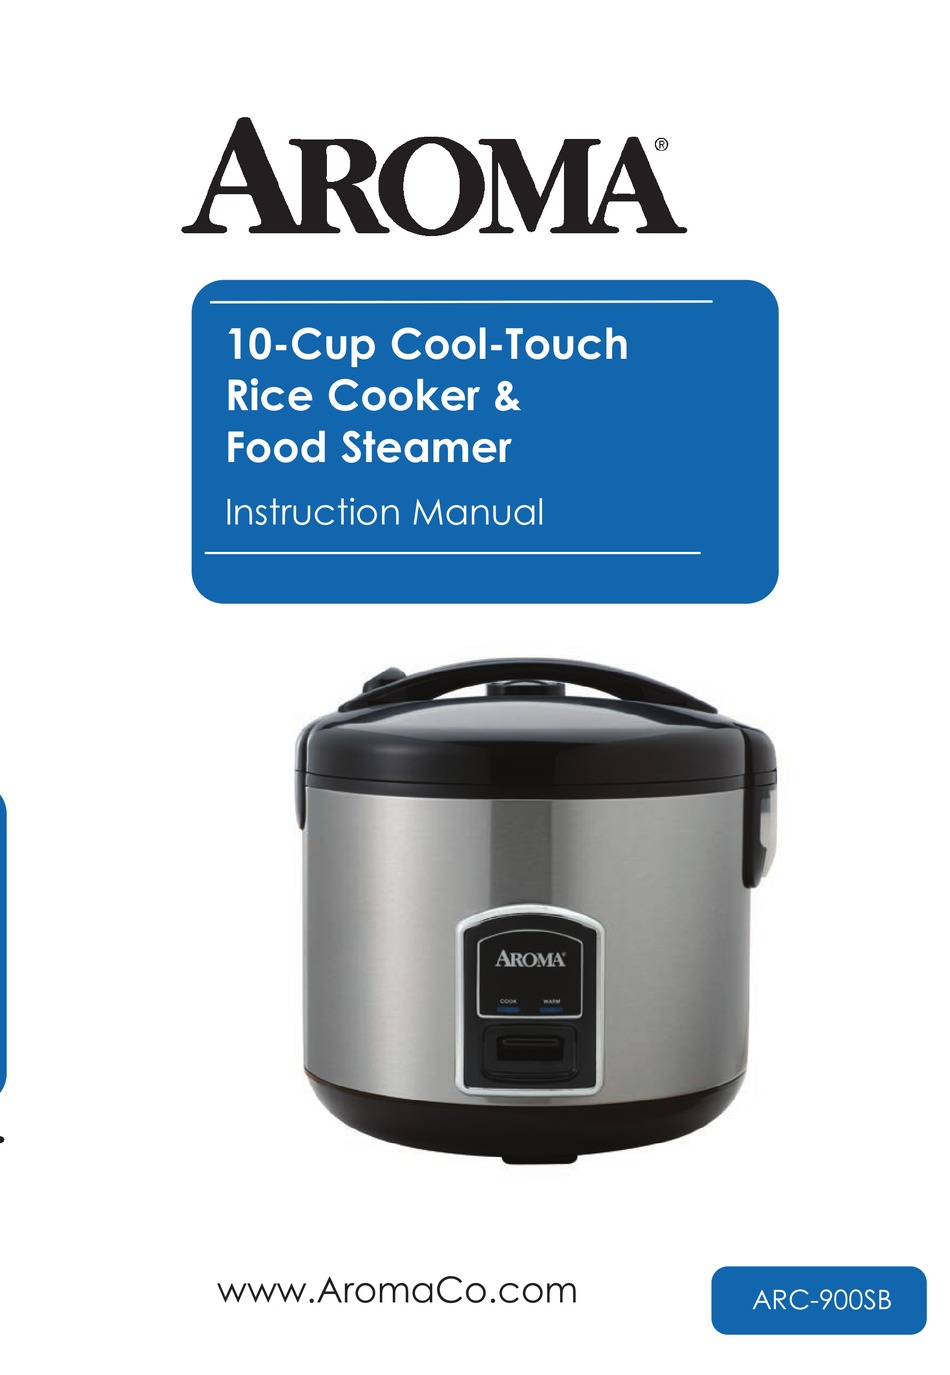 AROMA ARC-914S 4-Cup Cool-Touch Rice Cooker Instruction Manual